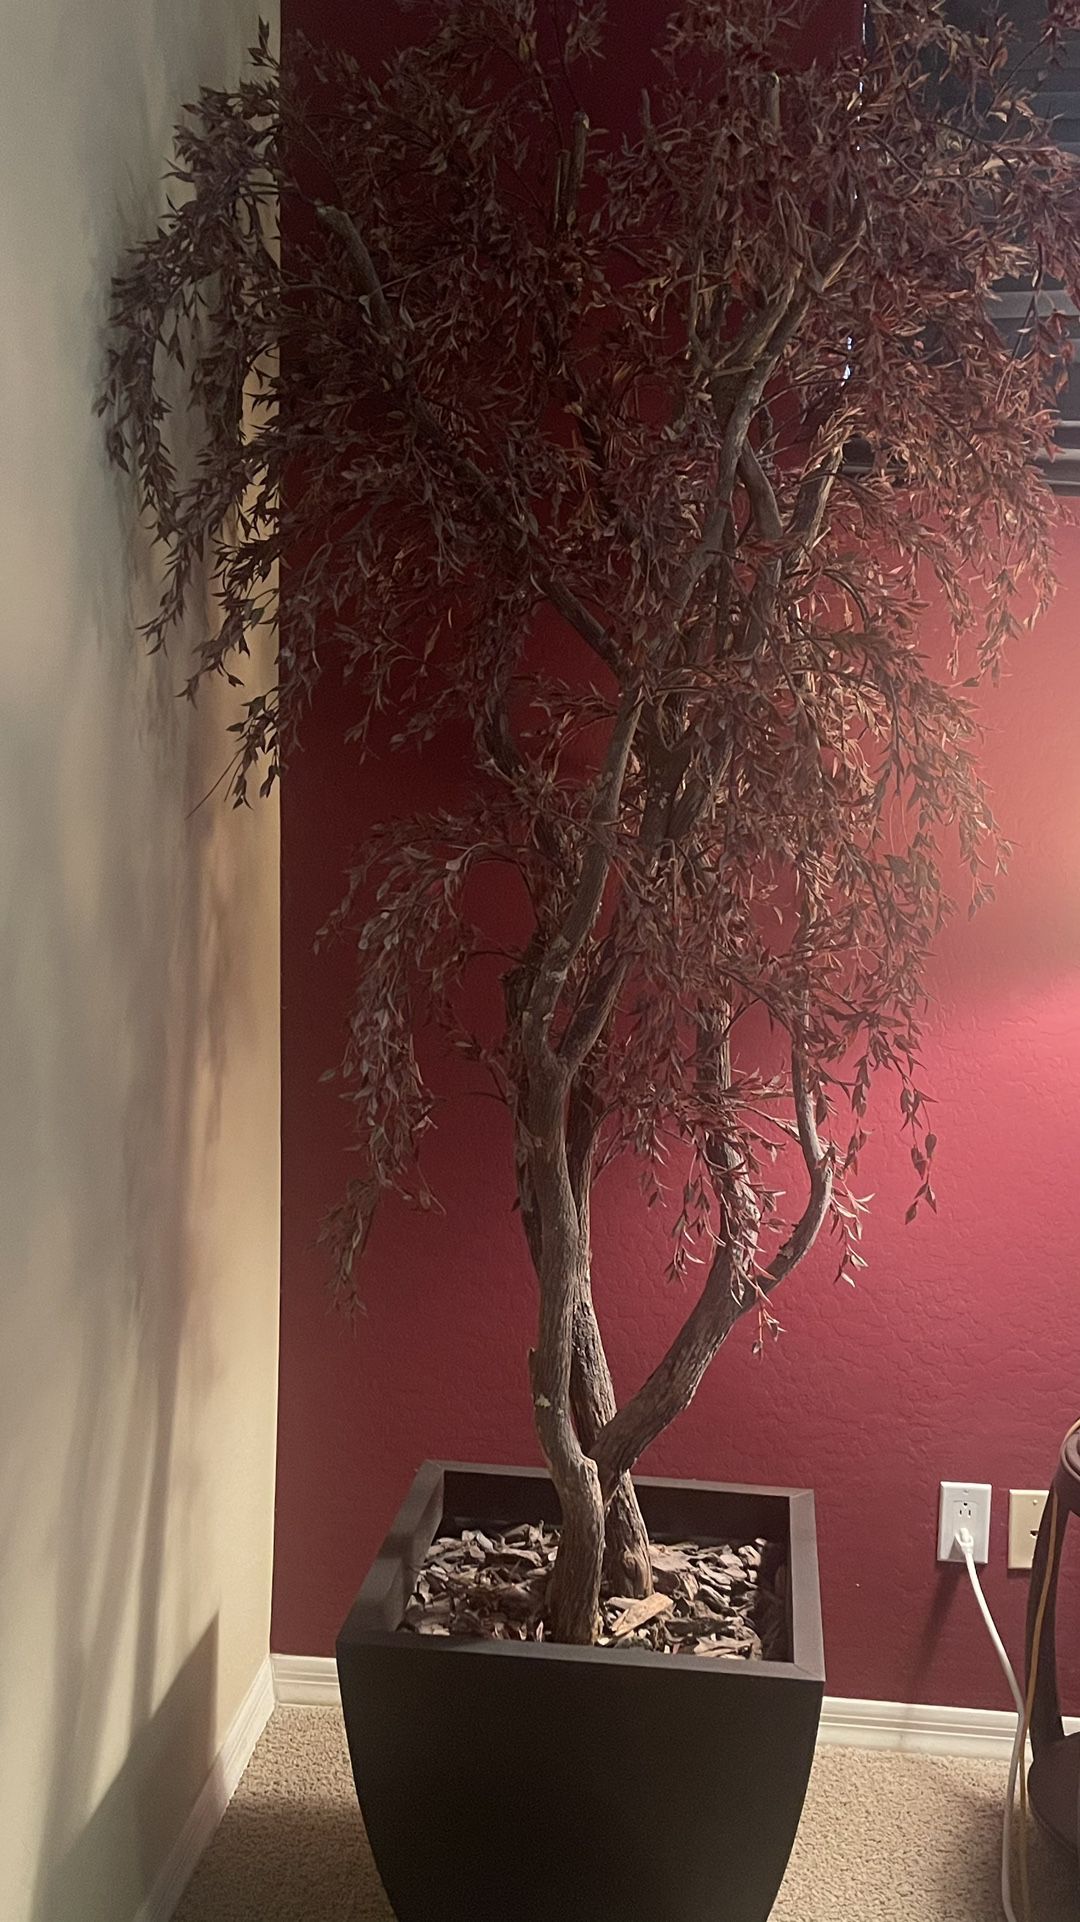 7 Foot Silk Plant/Tree Cost $1200. Selling for $250